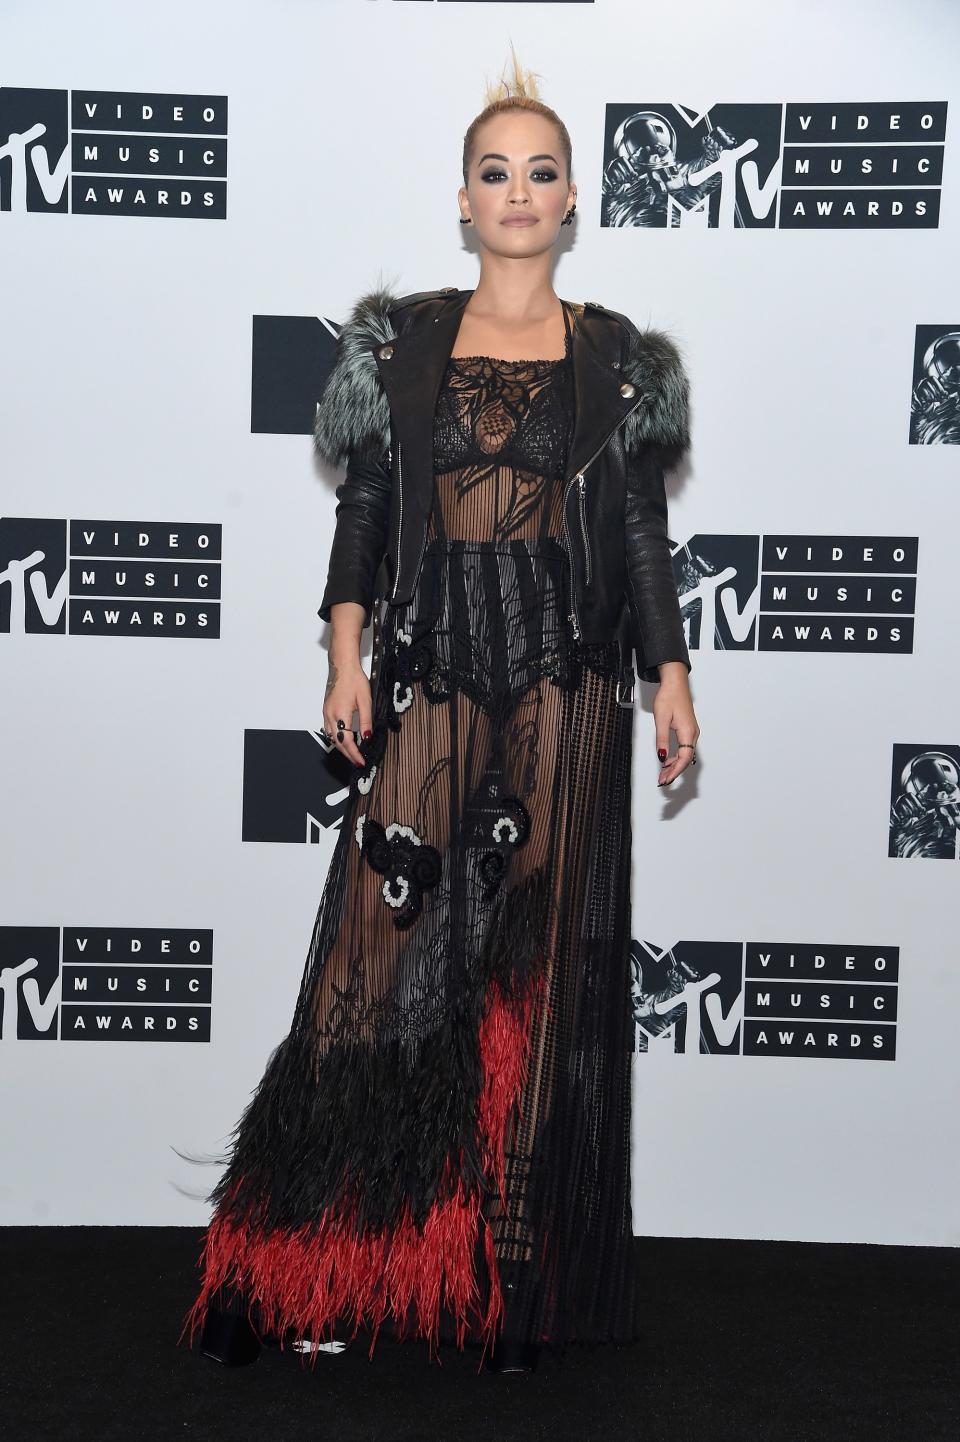 At the MTV VMA's, these stars proved that they know how to make an entrance in grand—and directional fashion.